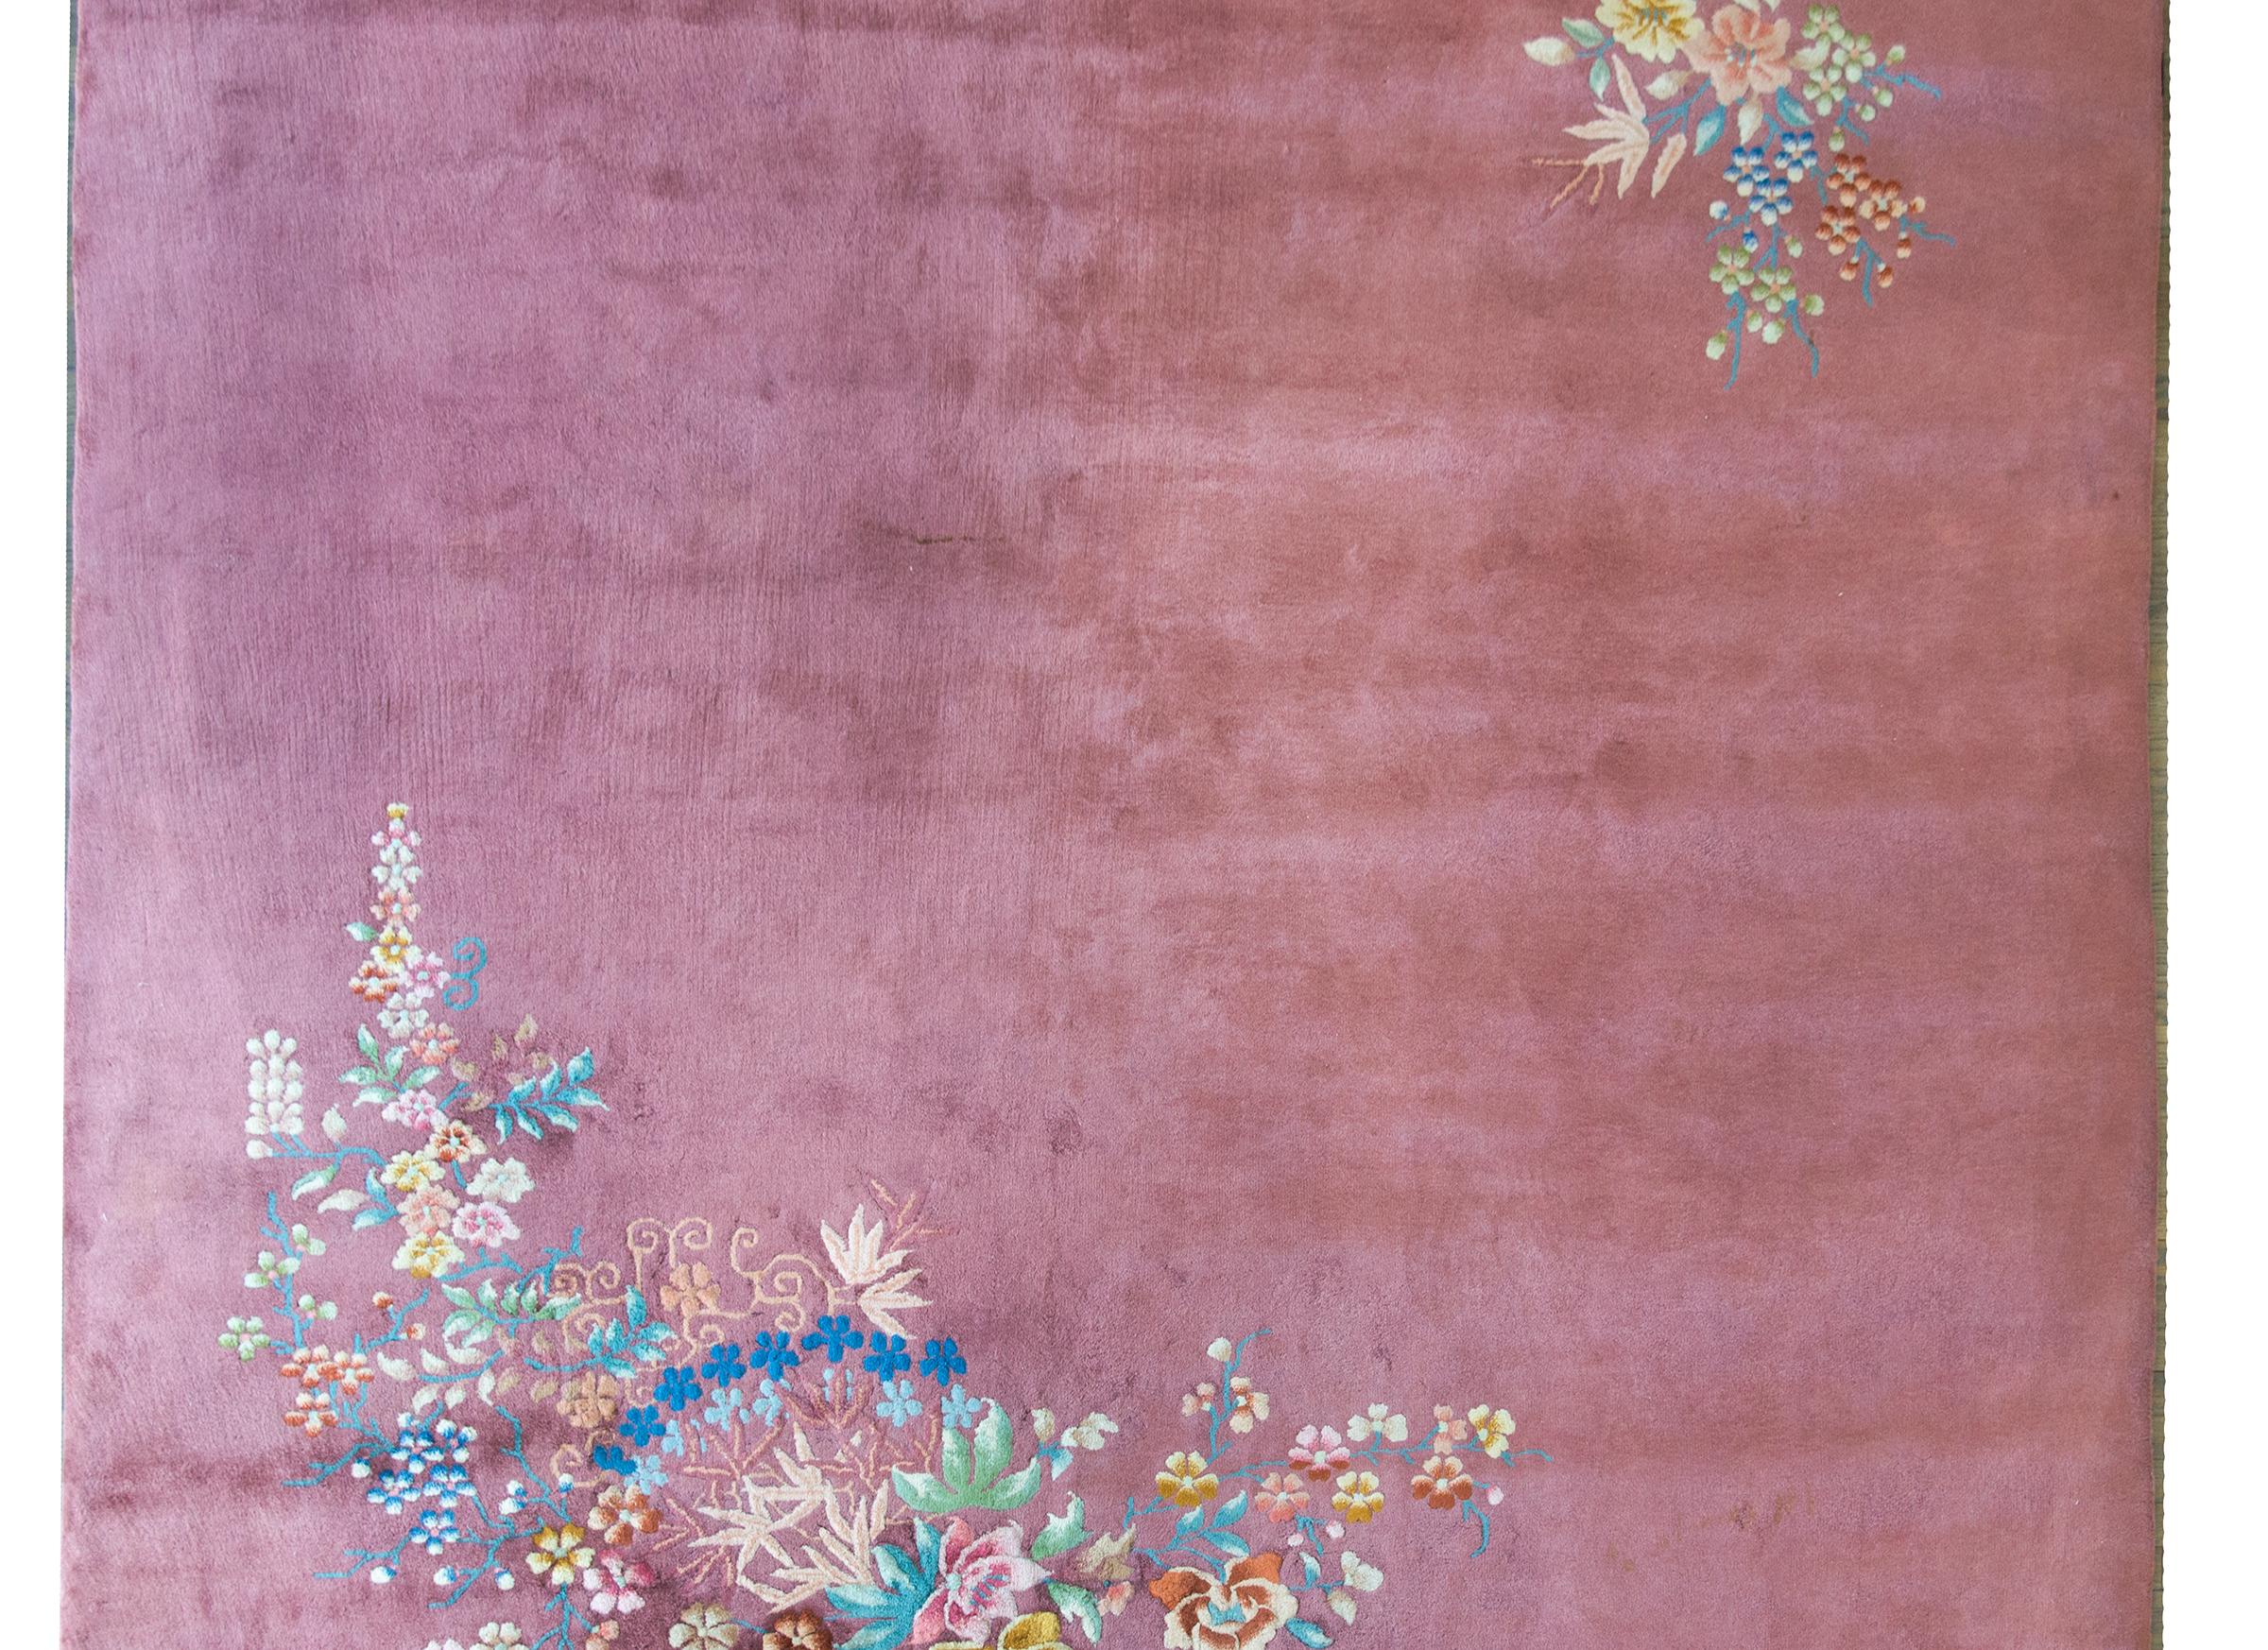 A wonderful early 20th century Chinese Art Deco rug with a solid mauve ground and one large cluster of multi-colored auspicious flowers including peonies, chrysanthemums, and cherry blossoms in one corner, and a smaller version of the same flowers